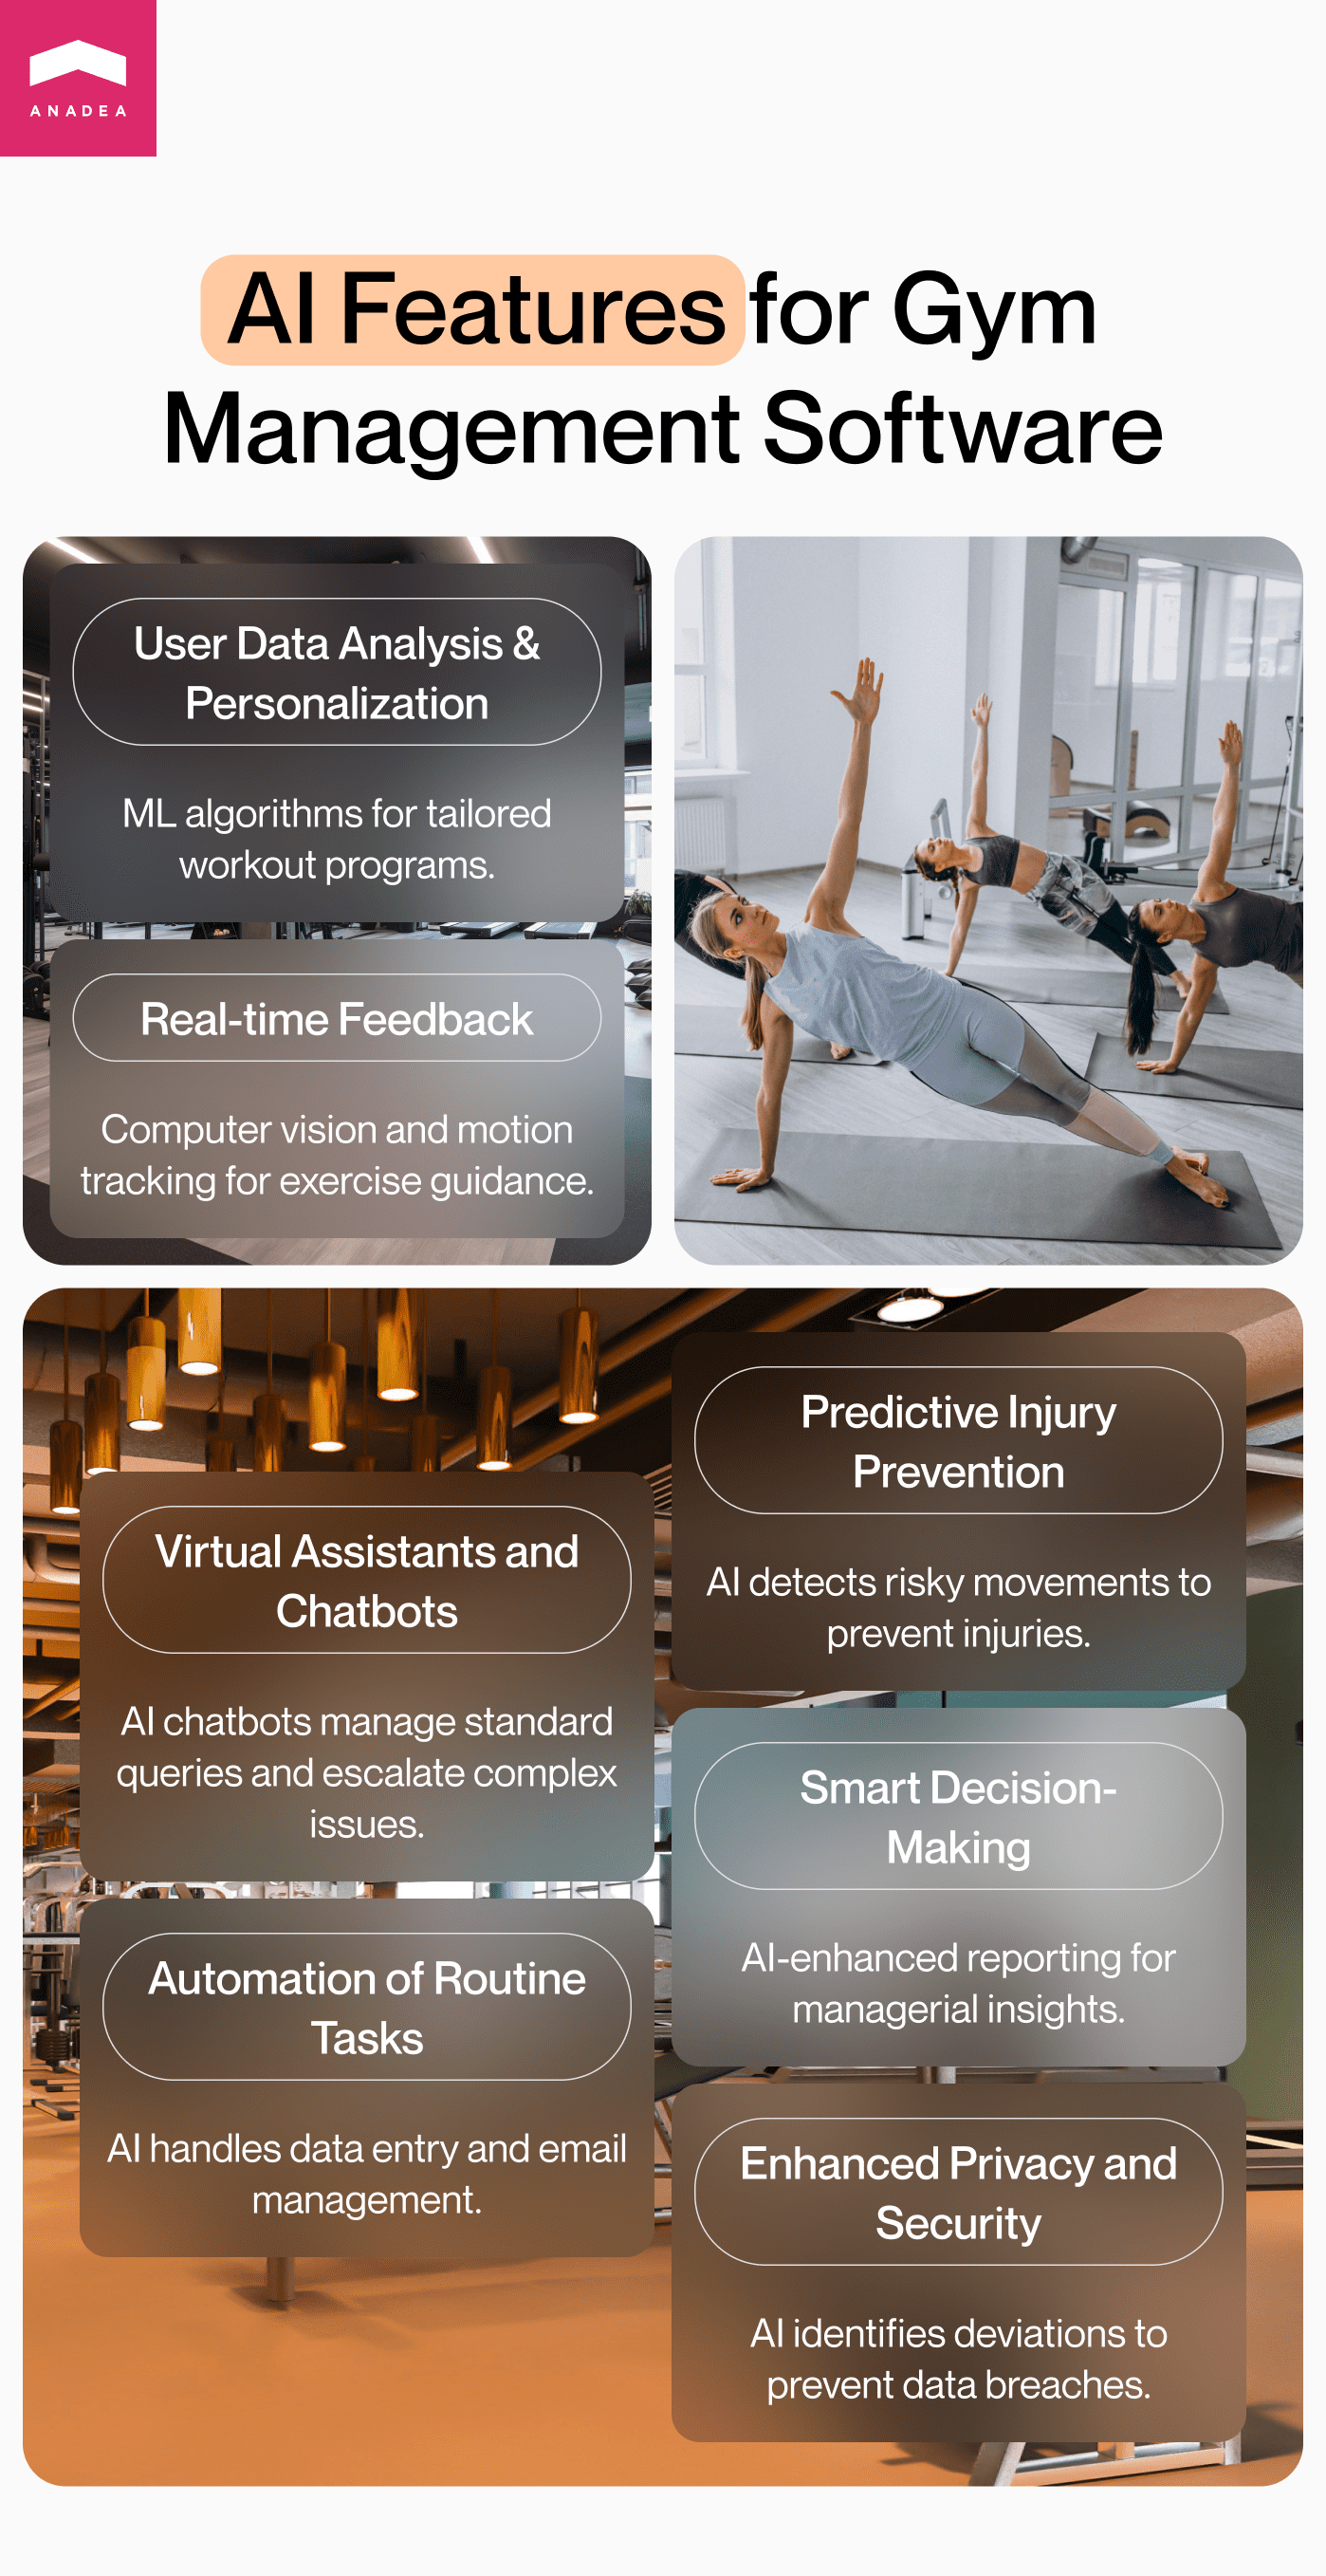 AI features for gym management software infographic